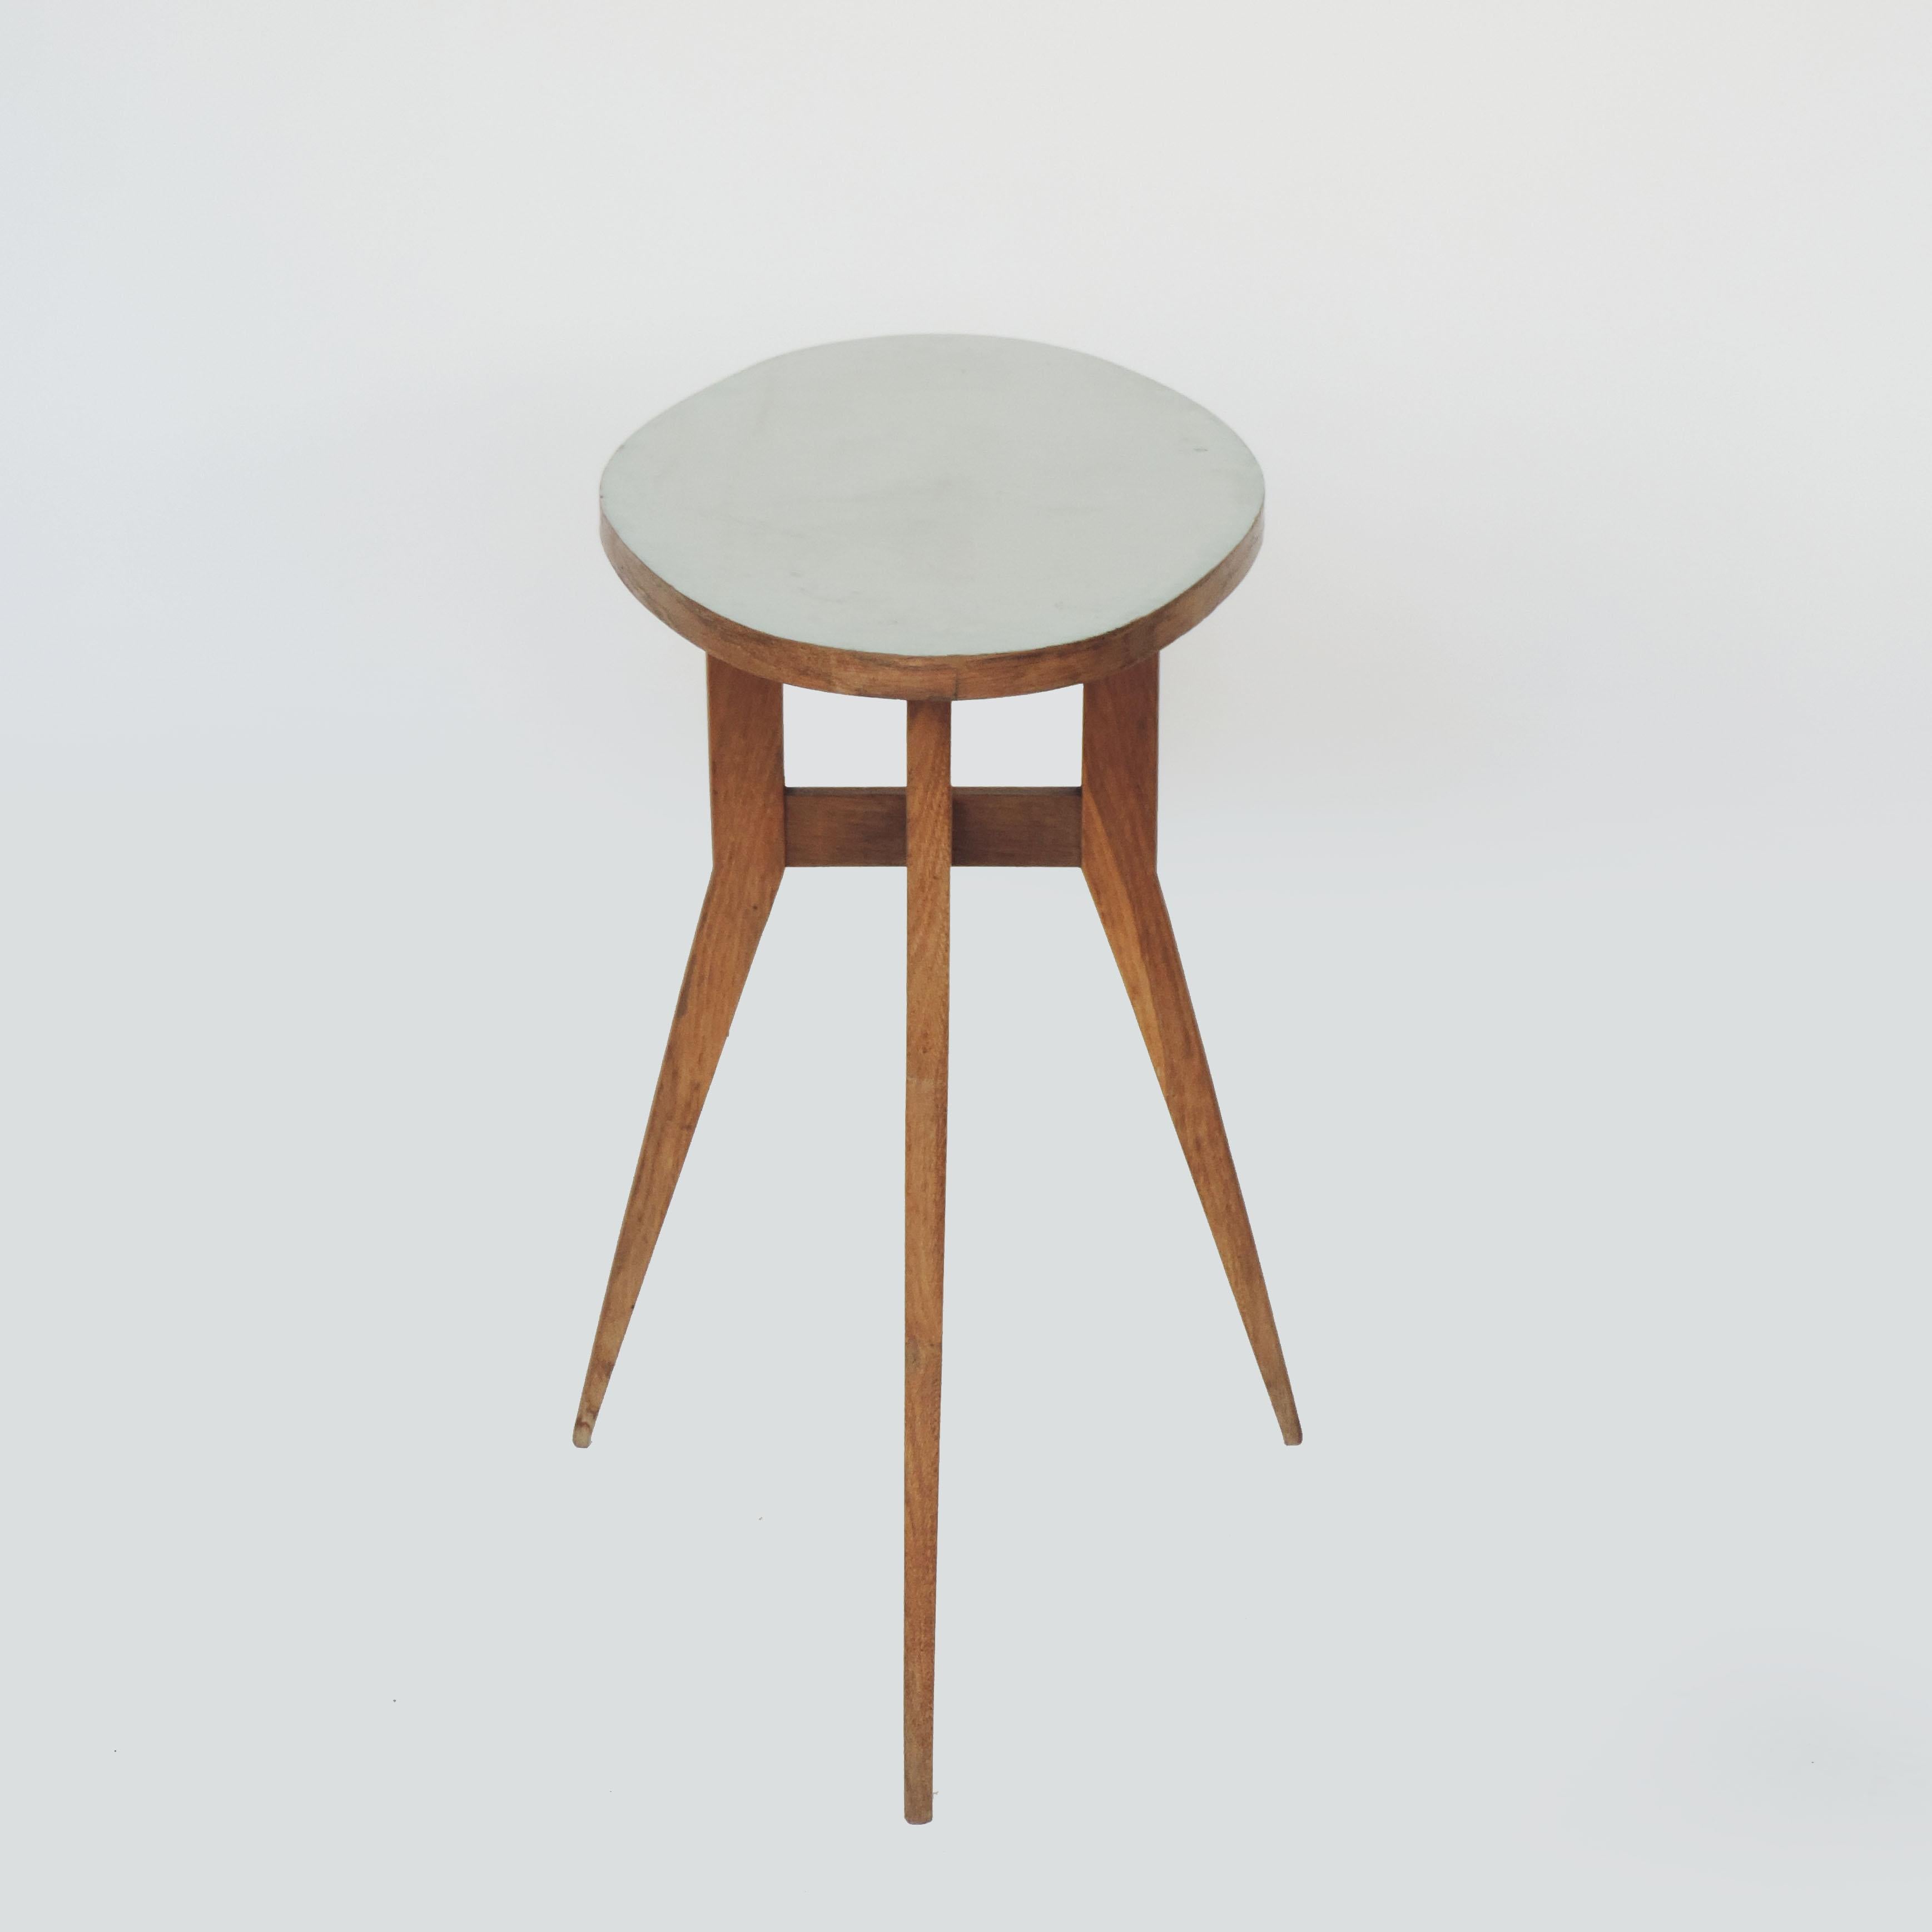 Formica Italian Midcentury Side Table Attributed to Gio Ponti